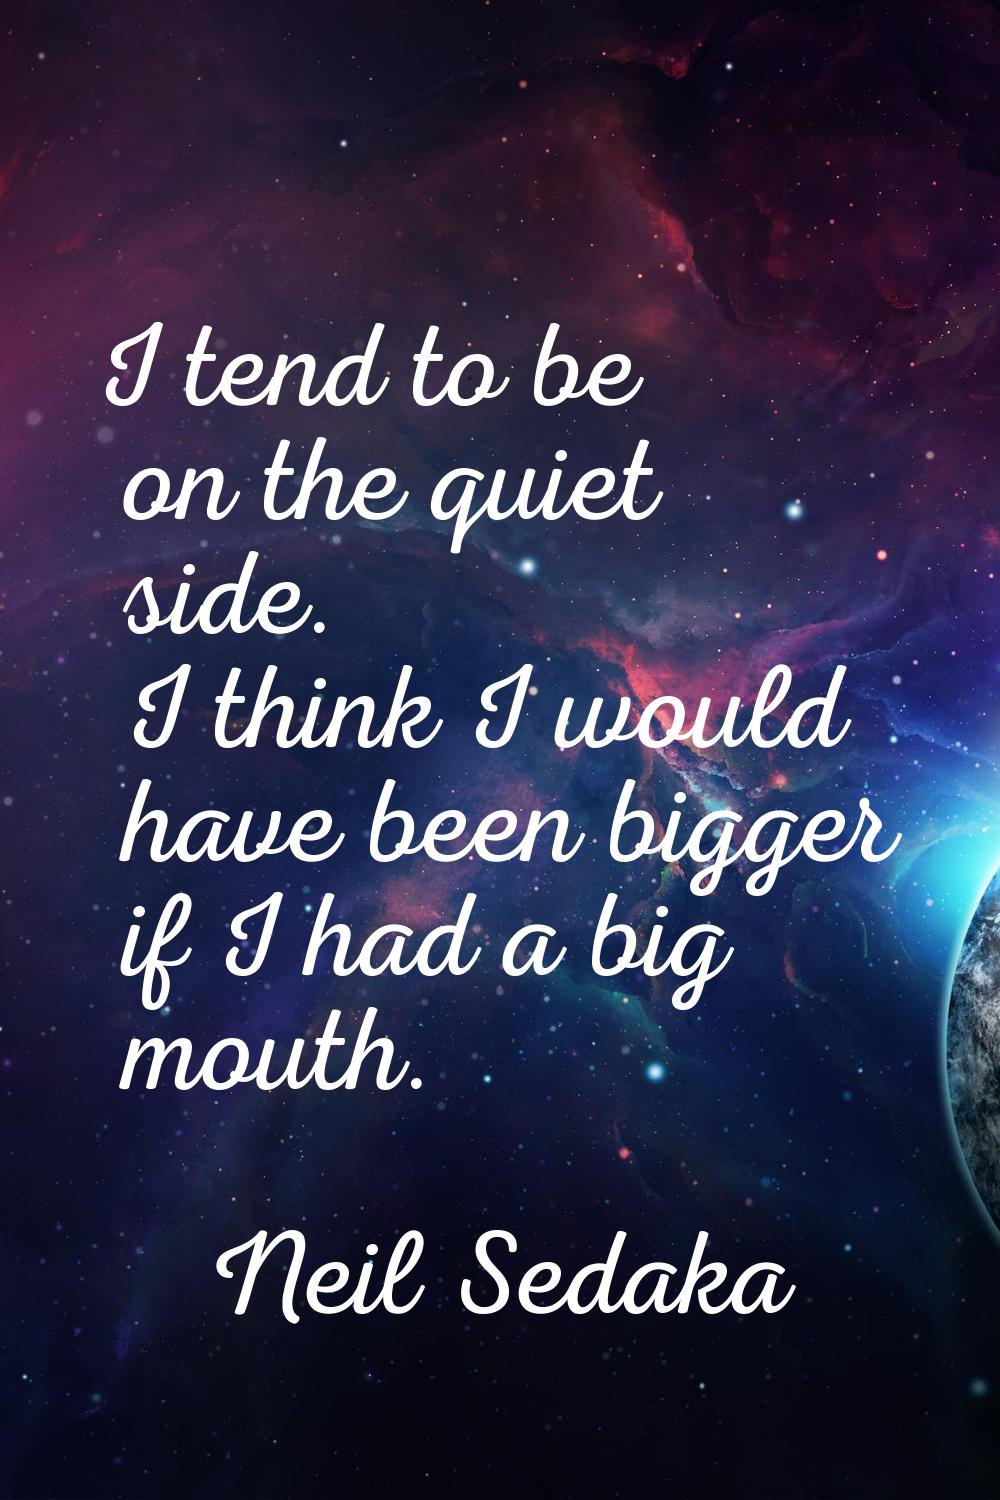 I tend to be on the quiet side. I think I would have been bigger if I had a big mouth.